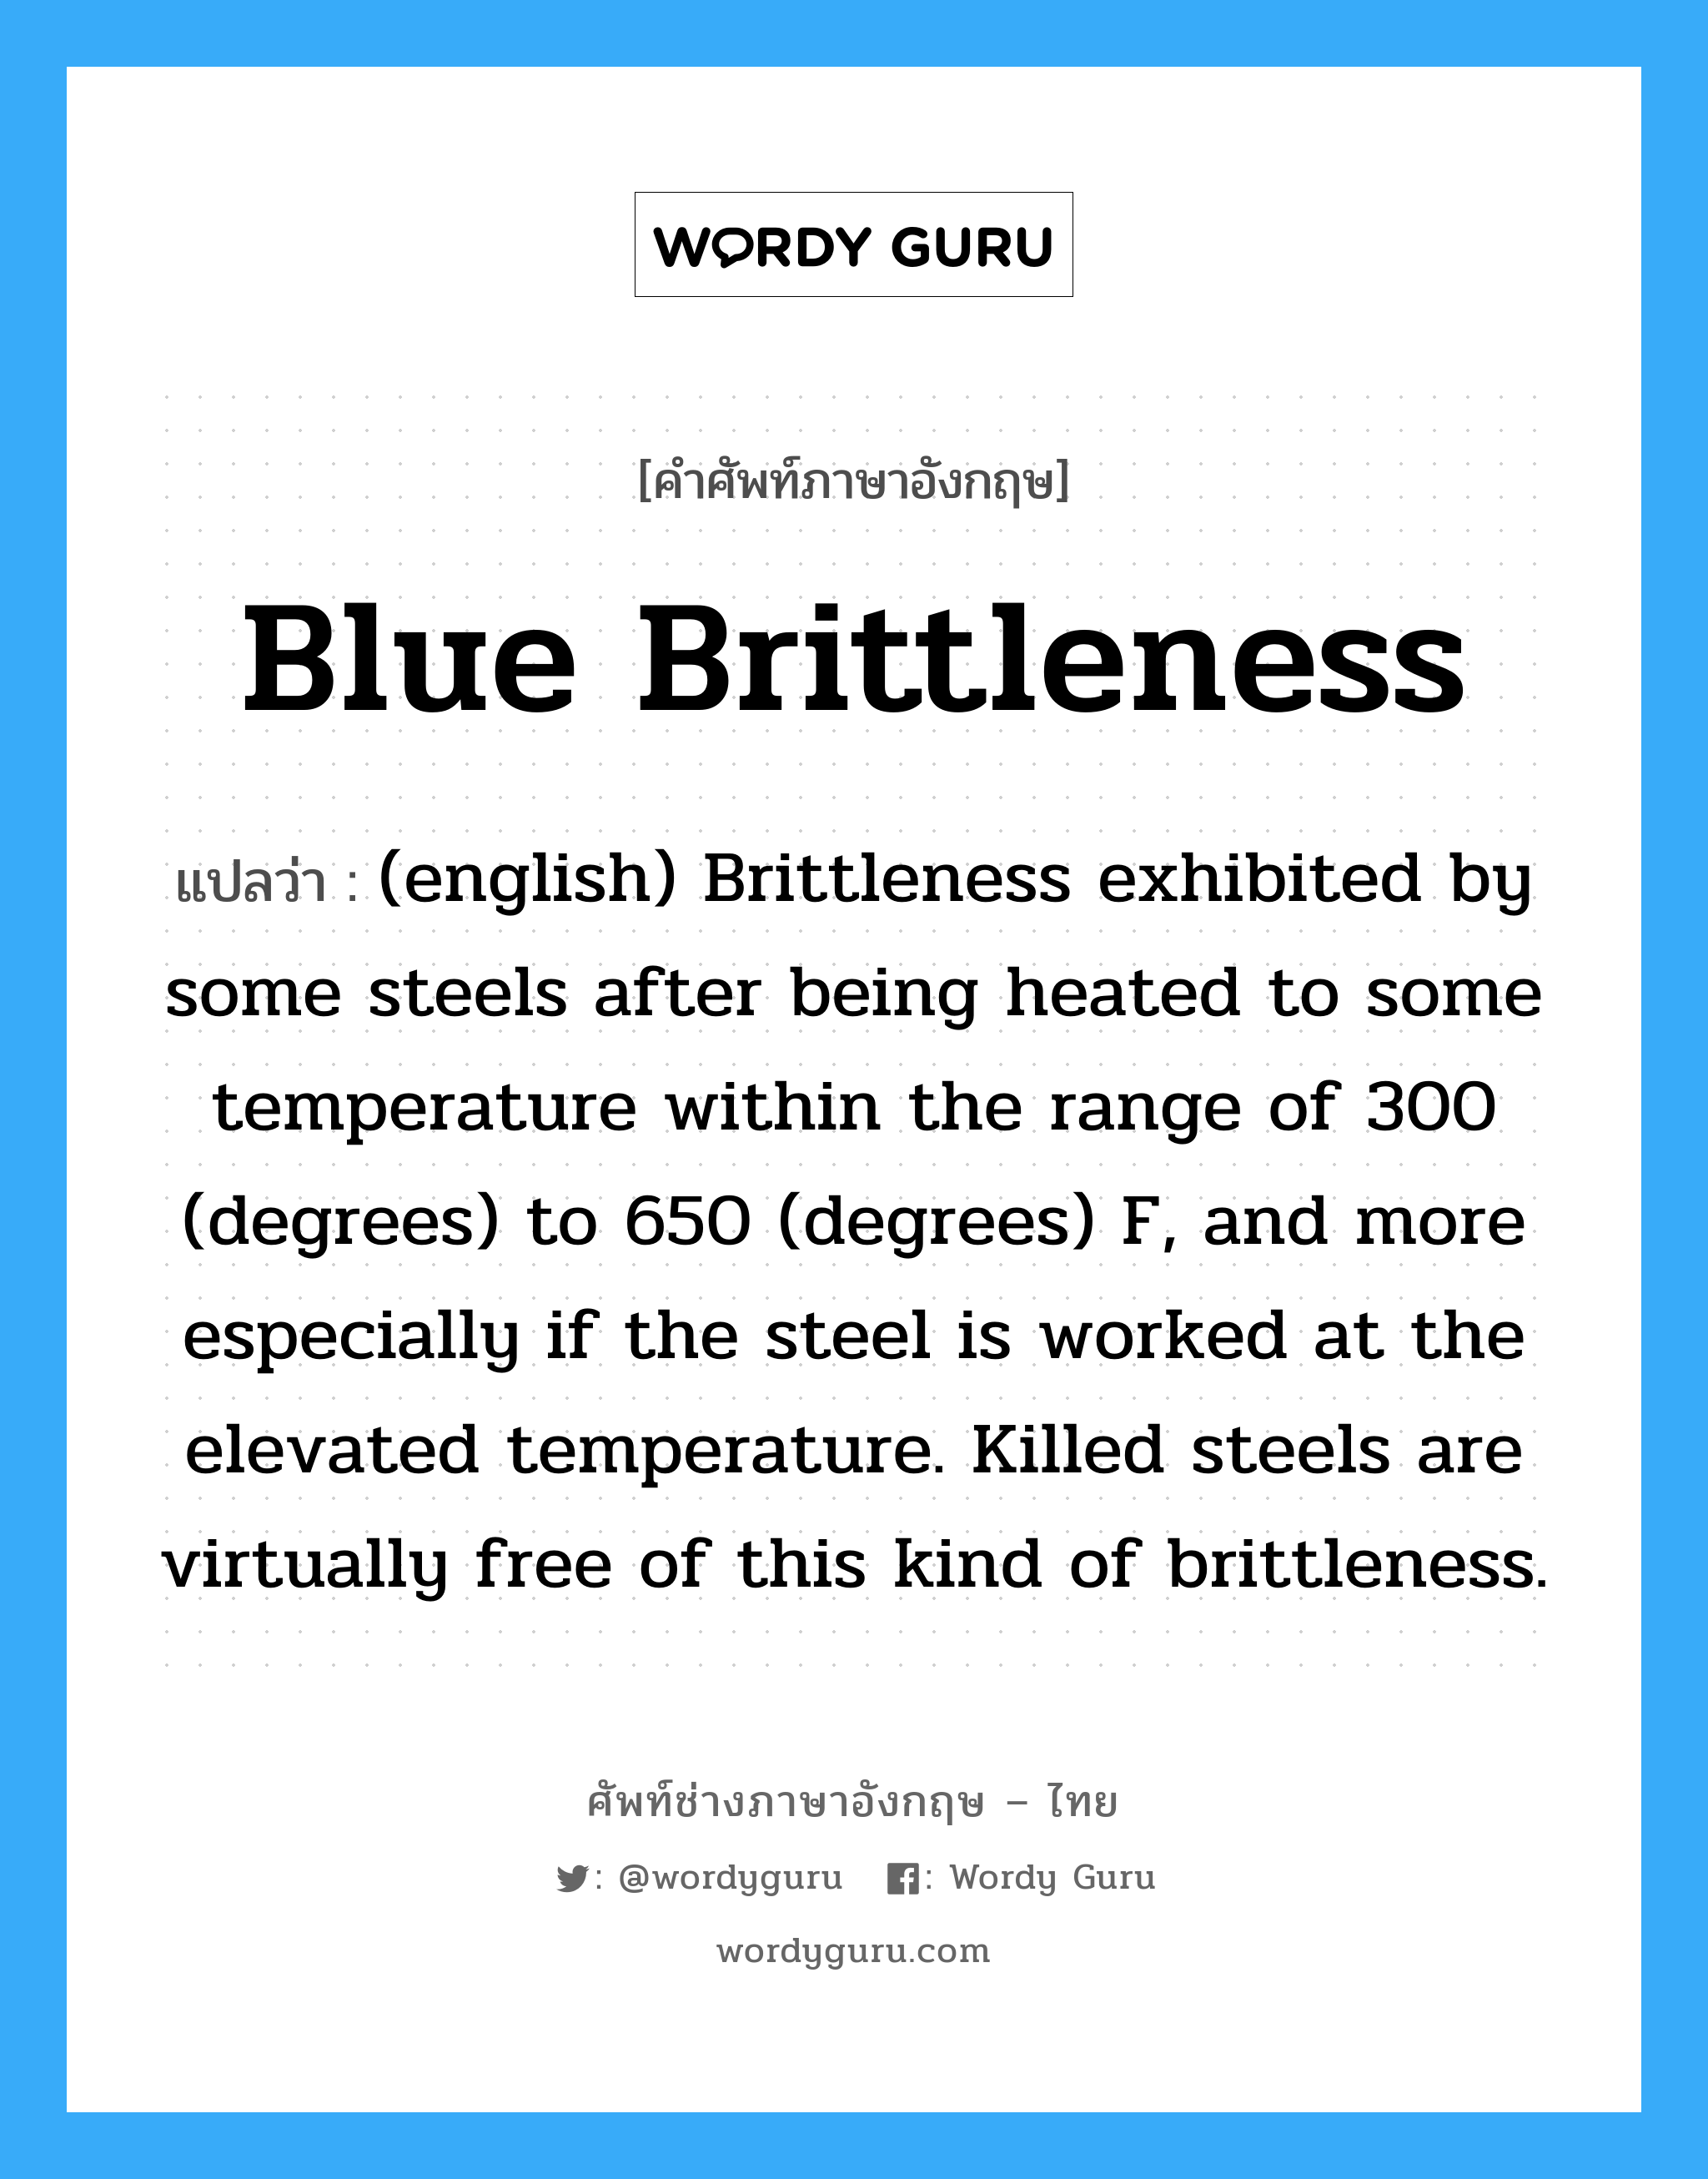 (english) Brittleness exhibited by some steels after being heated to some temperature within the range of 300 (degrees) to 650 (degrees) F, and more especially if the steel is worked at the elevated temperature. Killed steels are virtually free of this kind of brittleness. ภาษาอังกฤษ?, คำศัพท์ช่างภาษาอังกฤษ - ไทย (english) Brittleness exhibited by some steels after being heated to some temperature within the range of 300 (degrees) to 650 (degrees) F, and more especially if the steel is worked at the elevated temperature. Killed steels are virtually free of this kind of brittleness. คำศัพท์ภาษาอังกฤษ (english) Brittleness exhibited by some steels after being heated to some temperature within the range of 300 (degrees) to 650 (degrees) F, and more especially if the steel is worked at the elevated temperature. Killed steels are virtually free of this kind of brittleness. แปลว่า Blue Brittleness